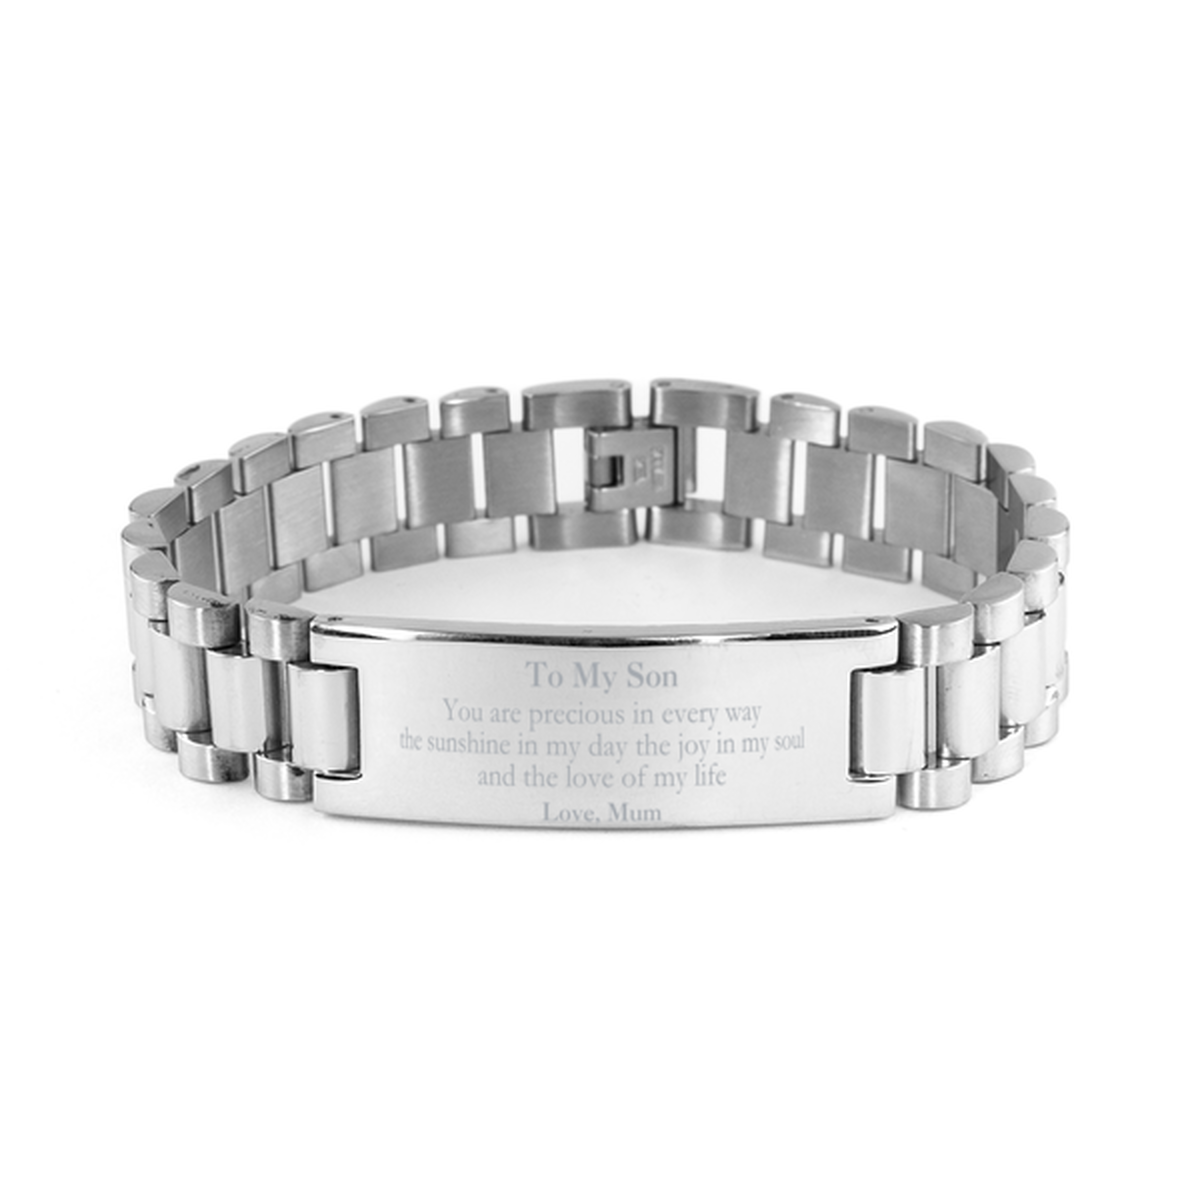 Graduation Gifts for Son Ladder Stainless Steel Bracelet Present from Mum, Christmas Son Birthday Gifts Son You are precious in every way the sunshine in my day. Love, Mum